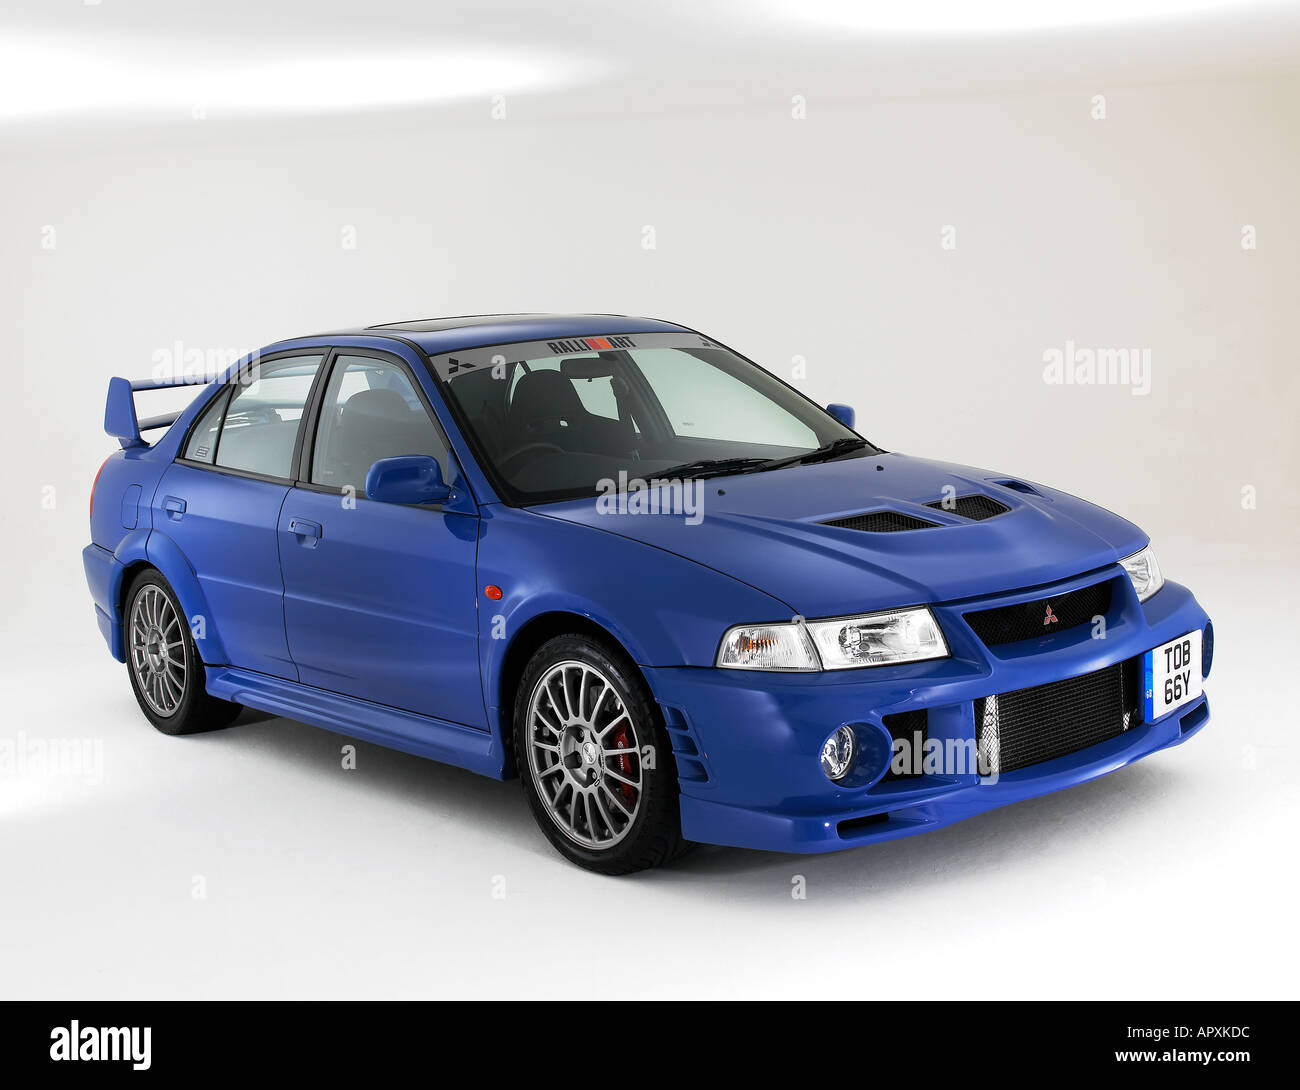 Evo 6 High Resolution Stock Photography and Images - Alamy